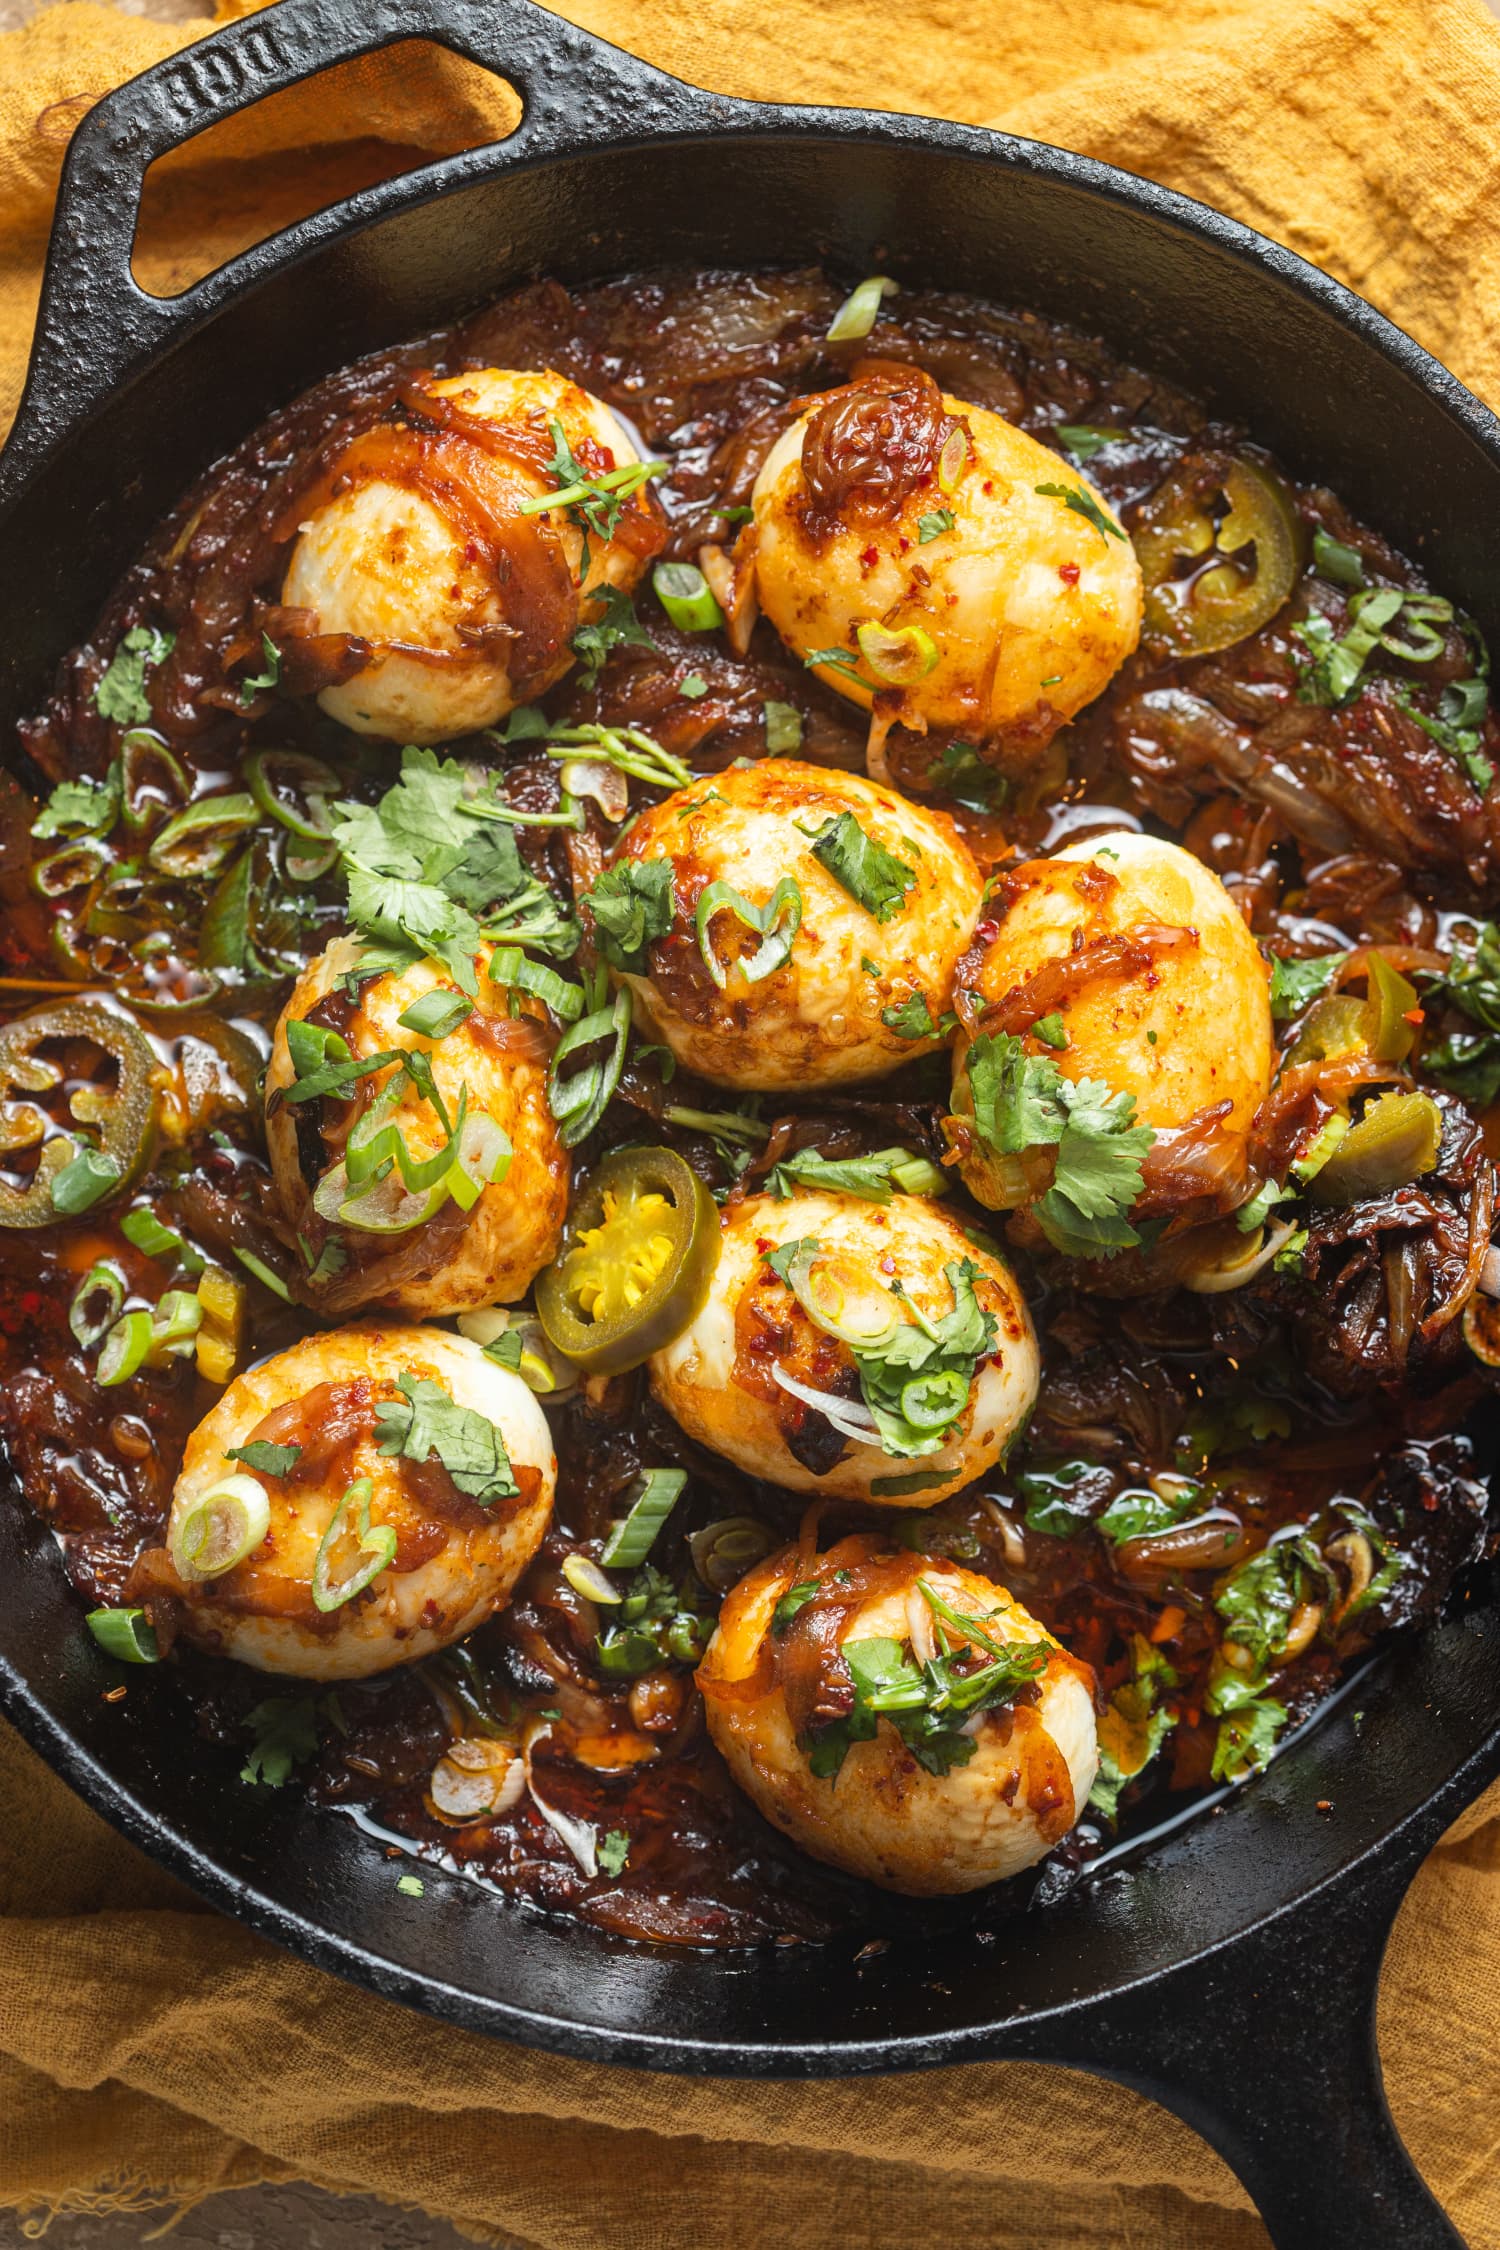 I Tried Yotam Ottolenghi’s Fried Boiled Eggs in Chili Sauce, and It Is Absolutely Magical